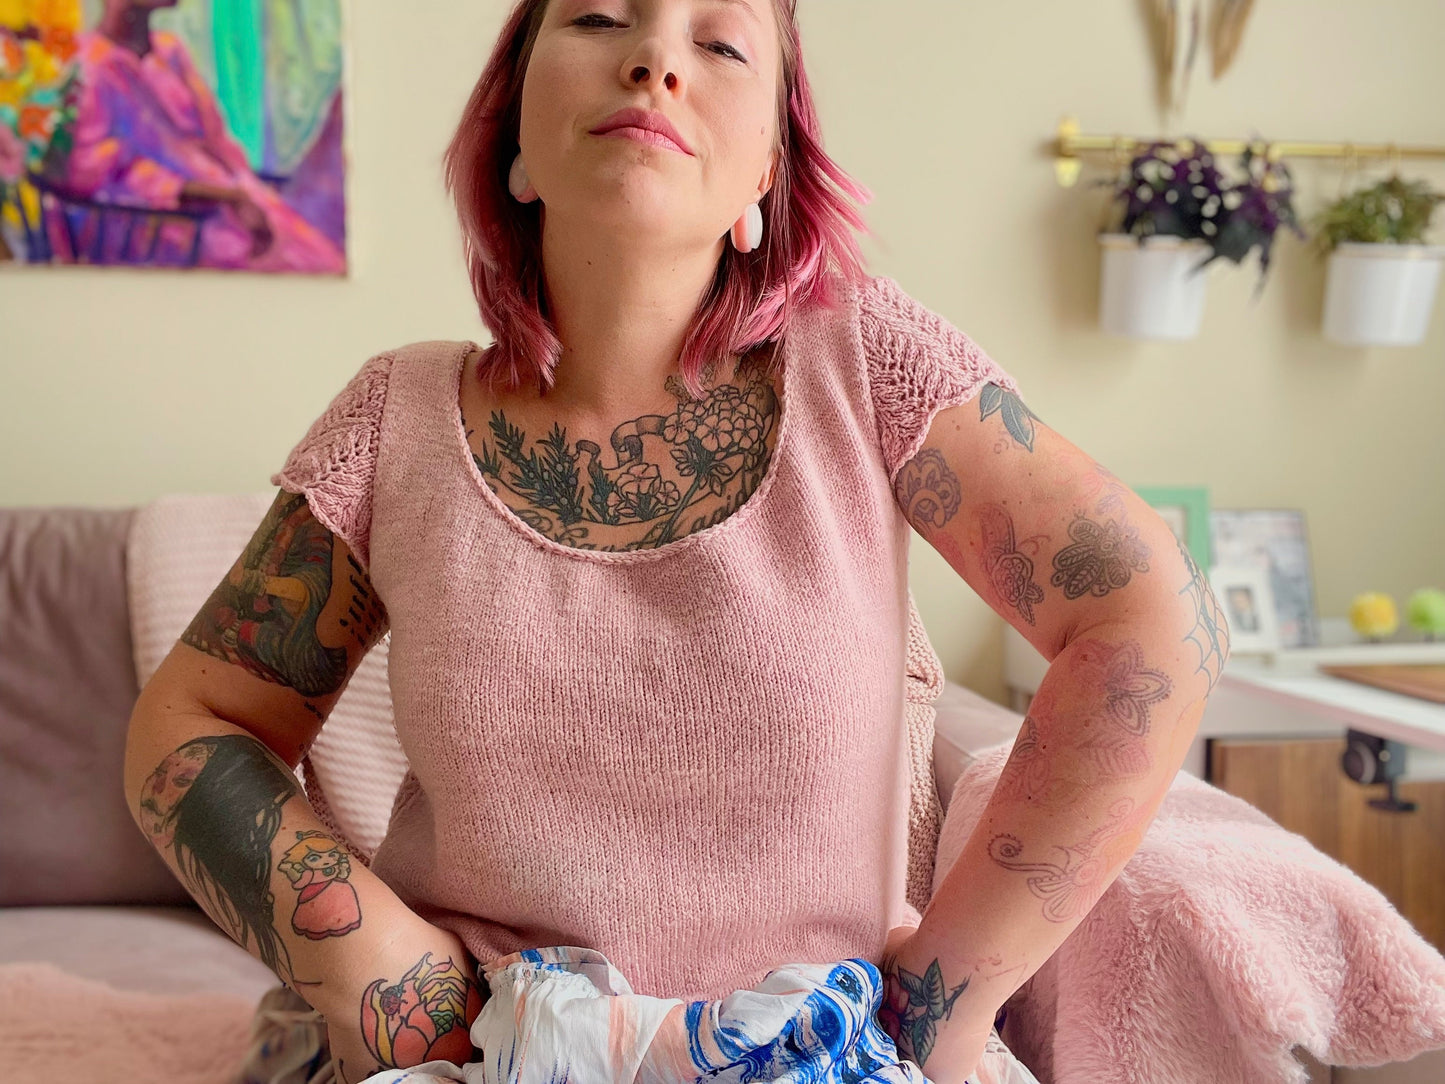 A woman sits on a dusty pink couch wearing a light pink wool tee with lace cap sleeves. She has many visible tattoos showing and sits with her hands on her hips and her shoulders shrugged in a defiant gesture.